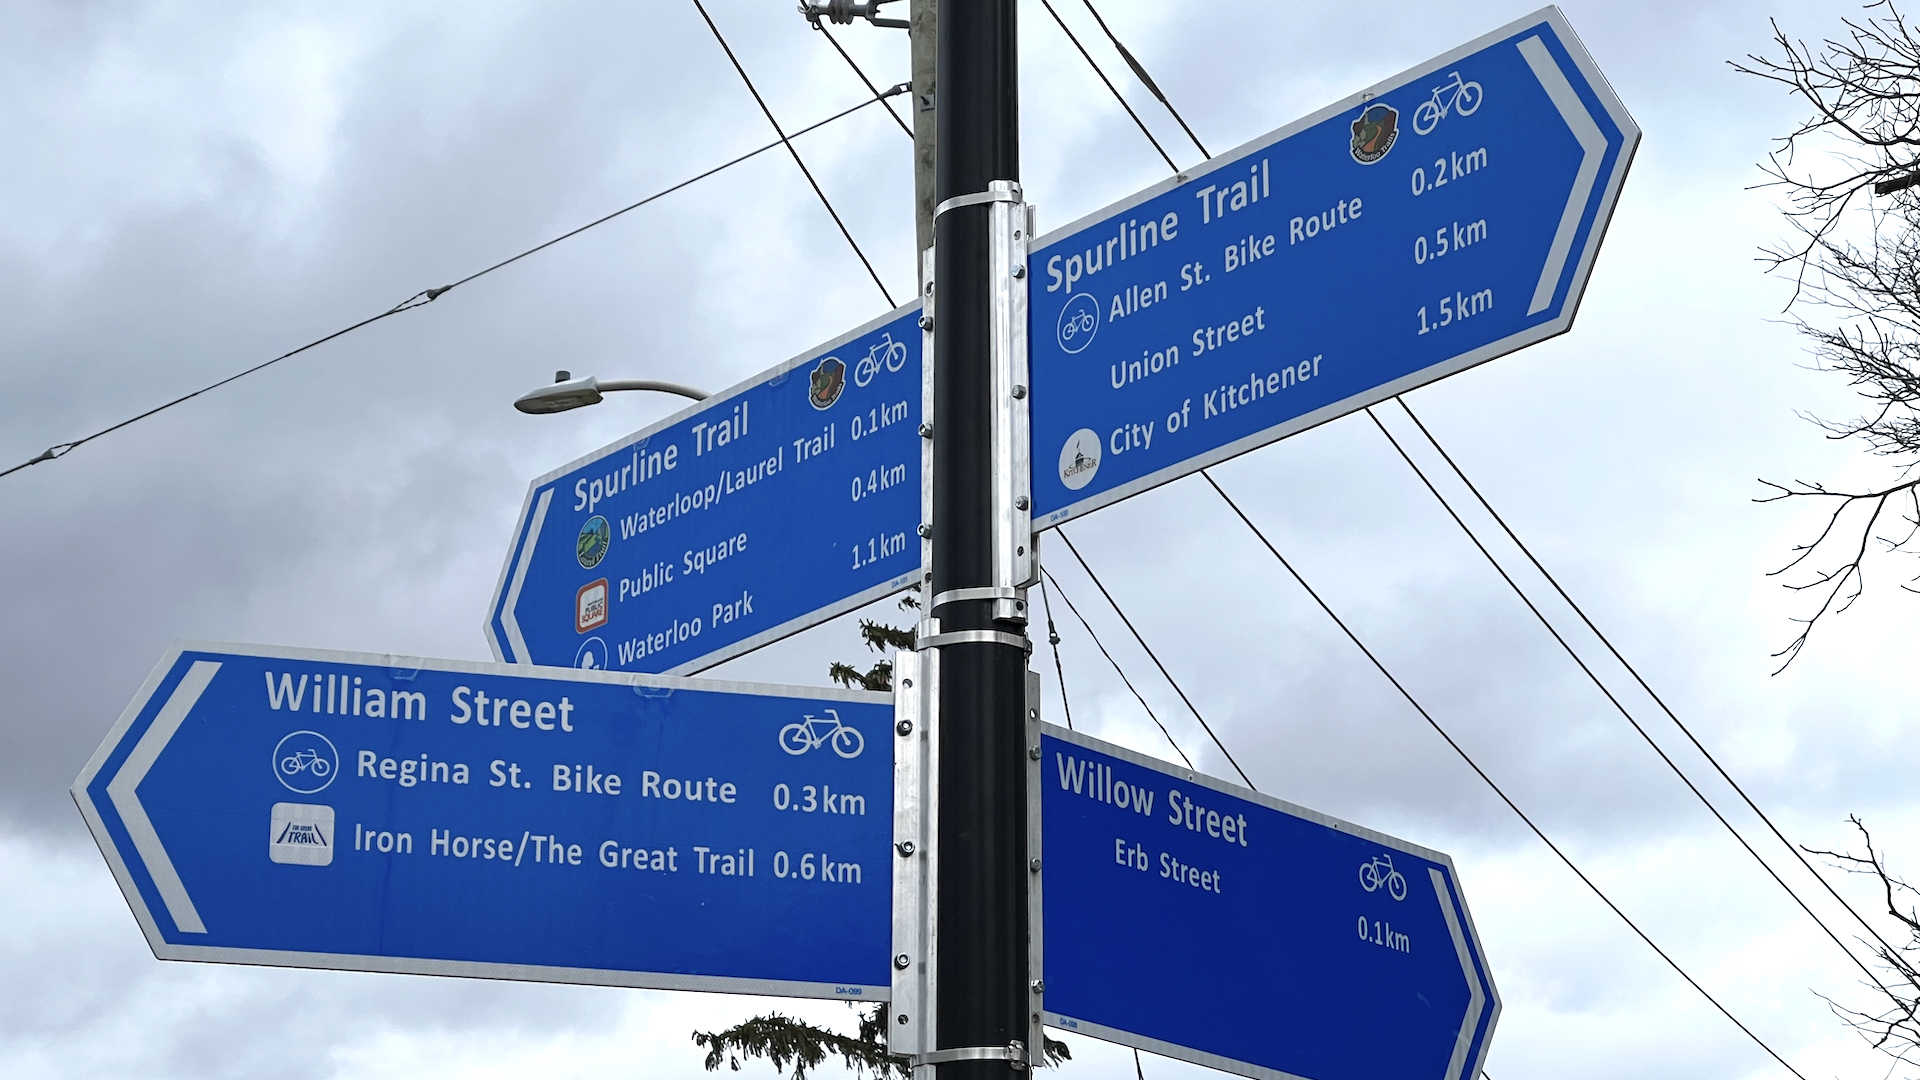 Blue trail signs point in 4 directions. The destinations include Waterloo/Laurel Trail, Waterloo Park, and City of Kitchener